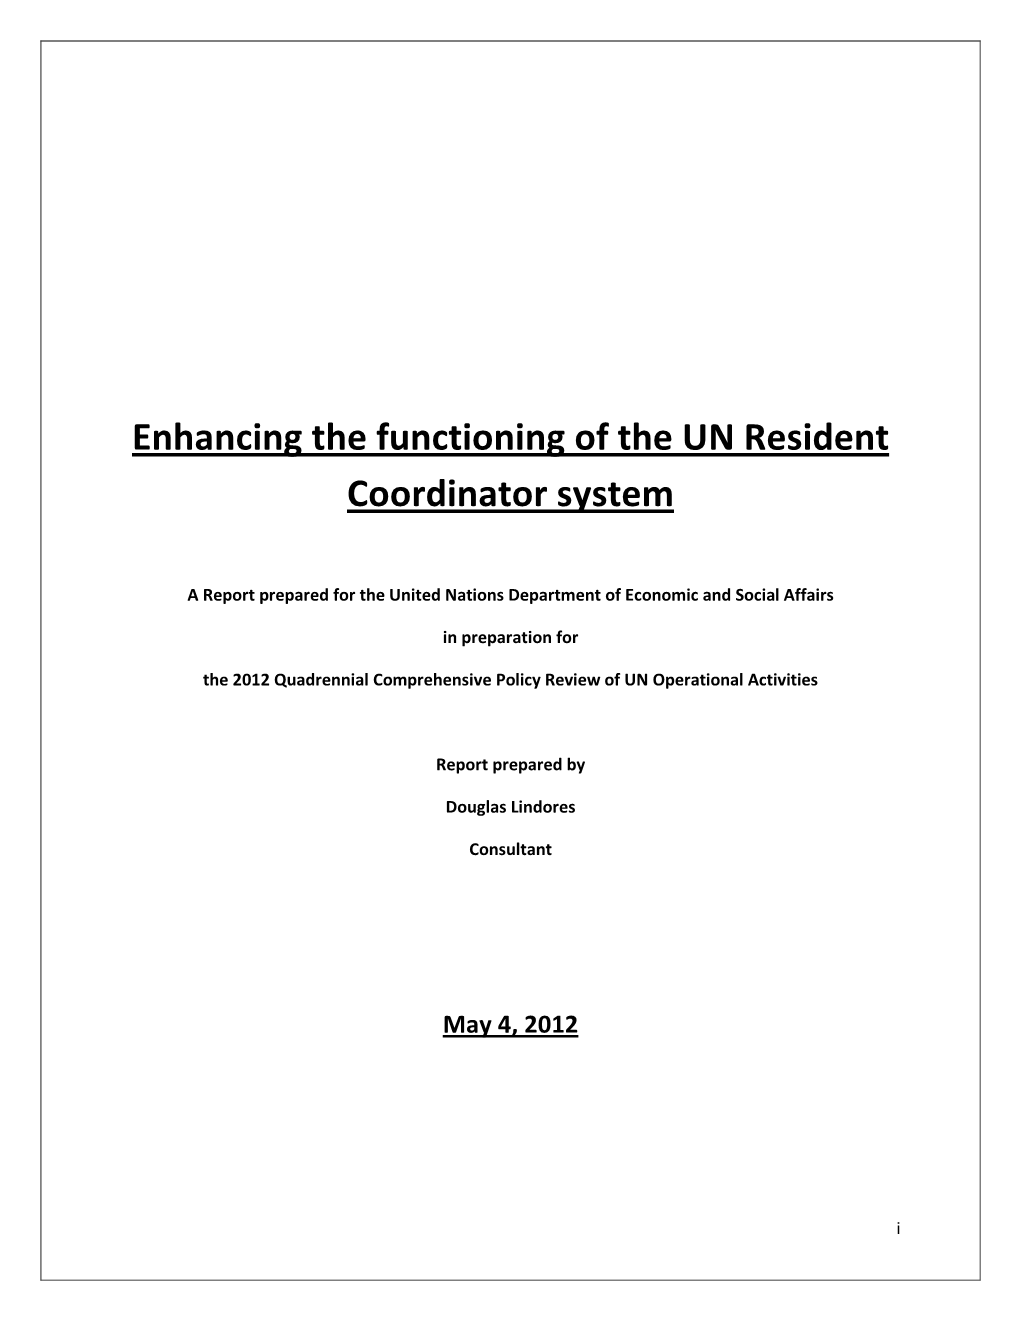 Enhancing the Functioning of the UN Resident Coordinator System